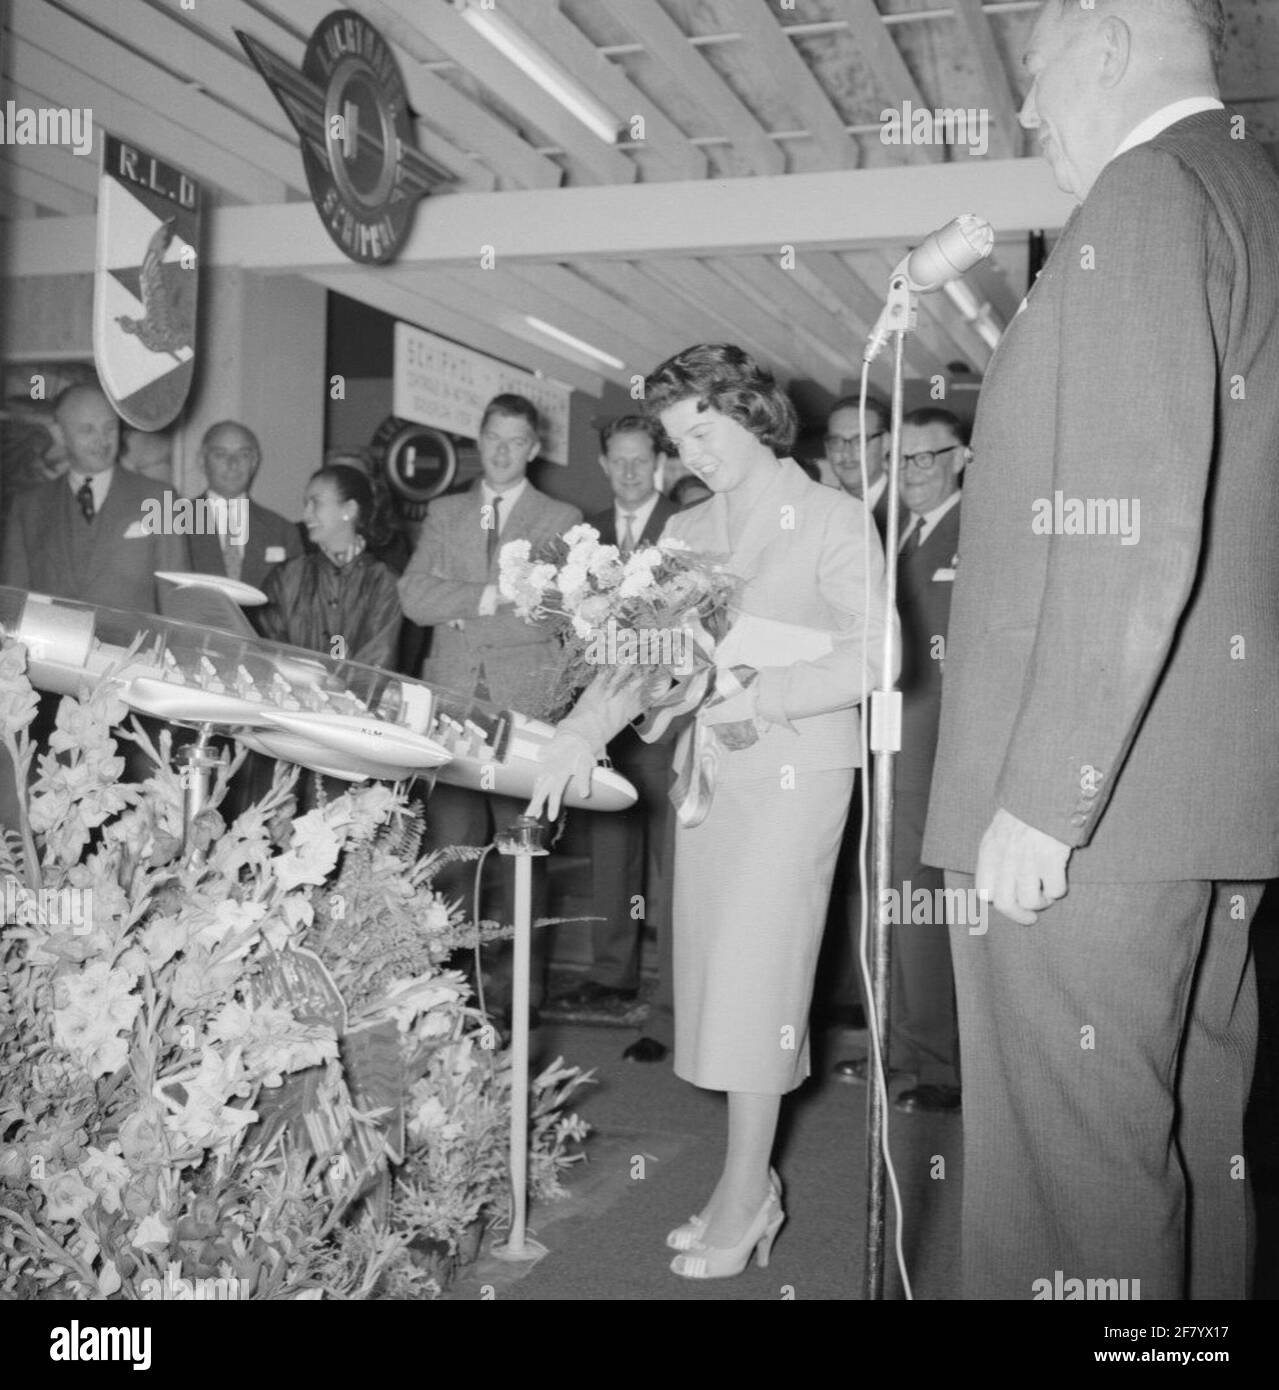 Opening aviation exhibition in an exhibition space in the retail promenade Lijnbaan in Rotterdam, March 1957. Stock Photo